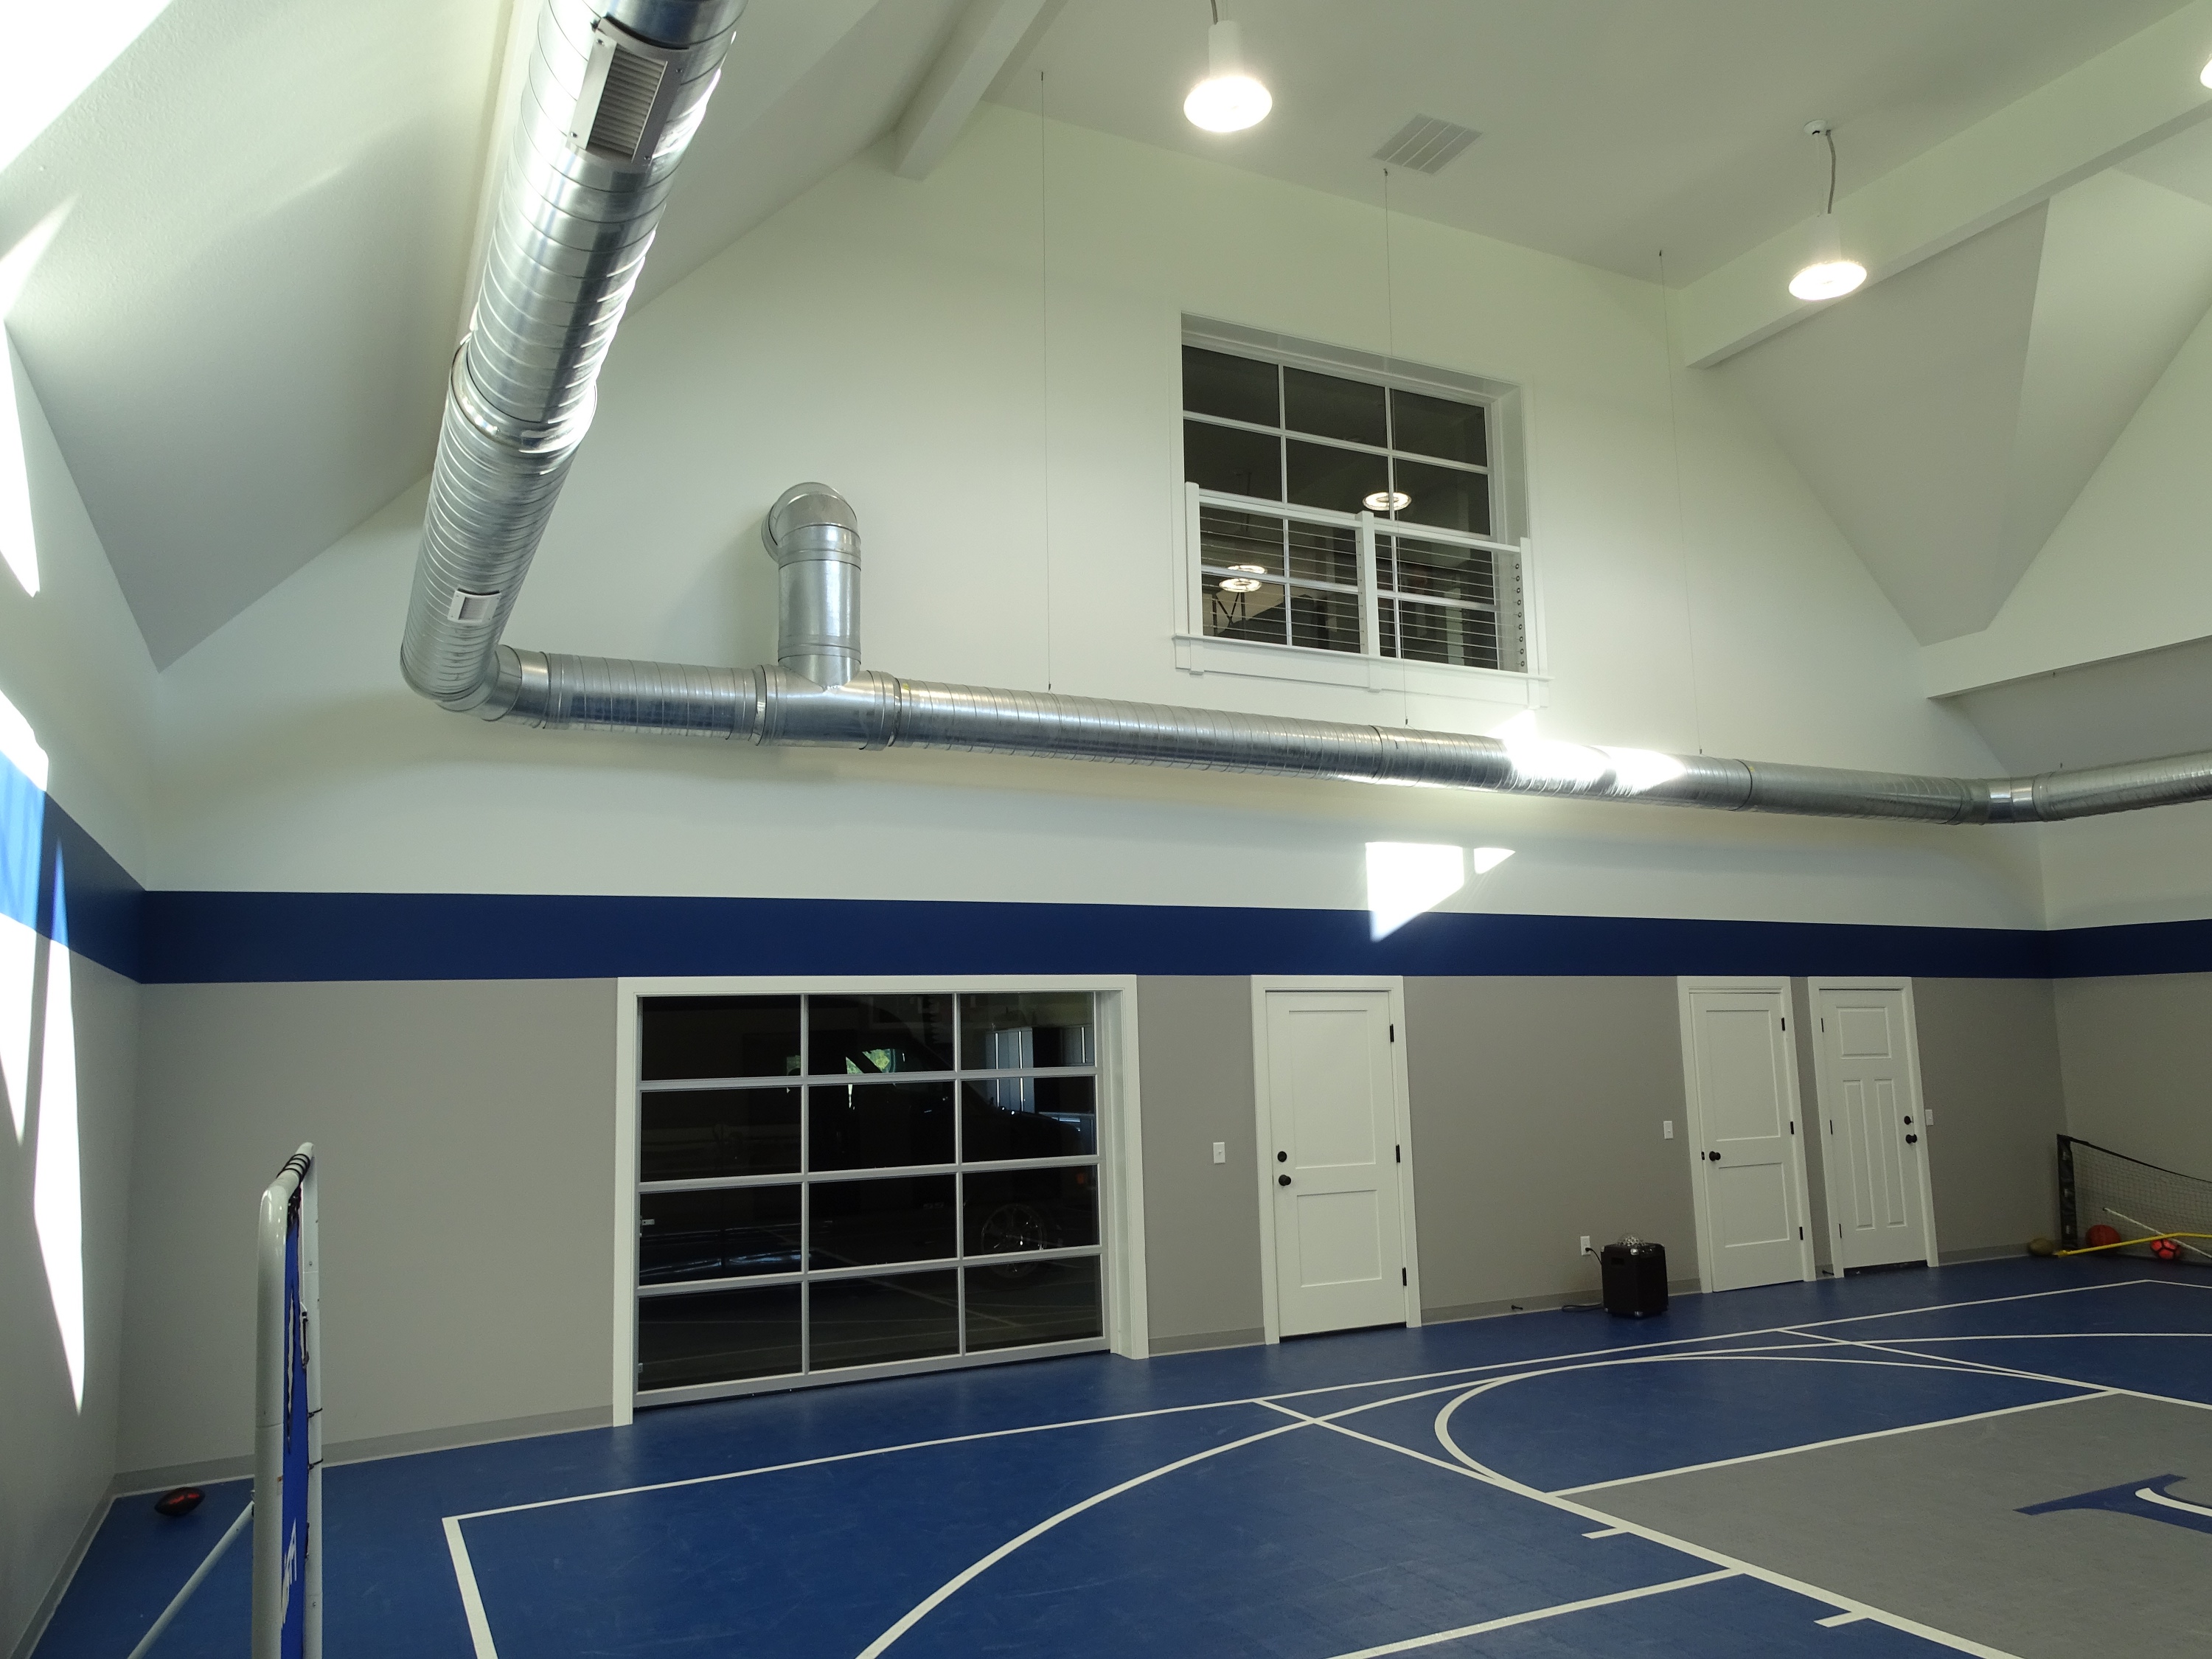 Interior view of recreation building